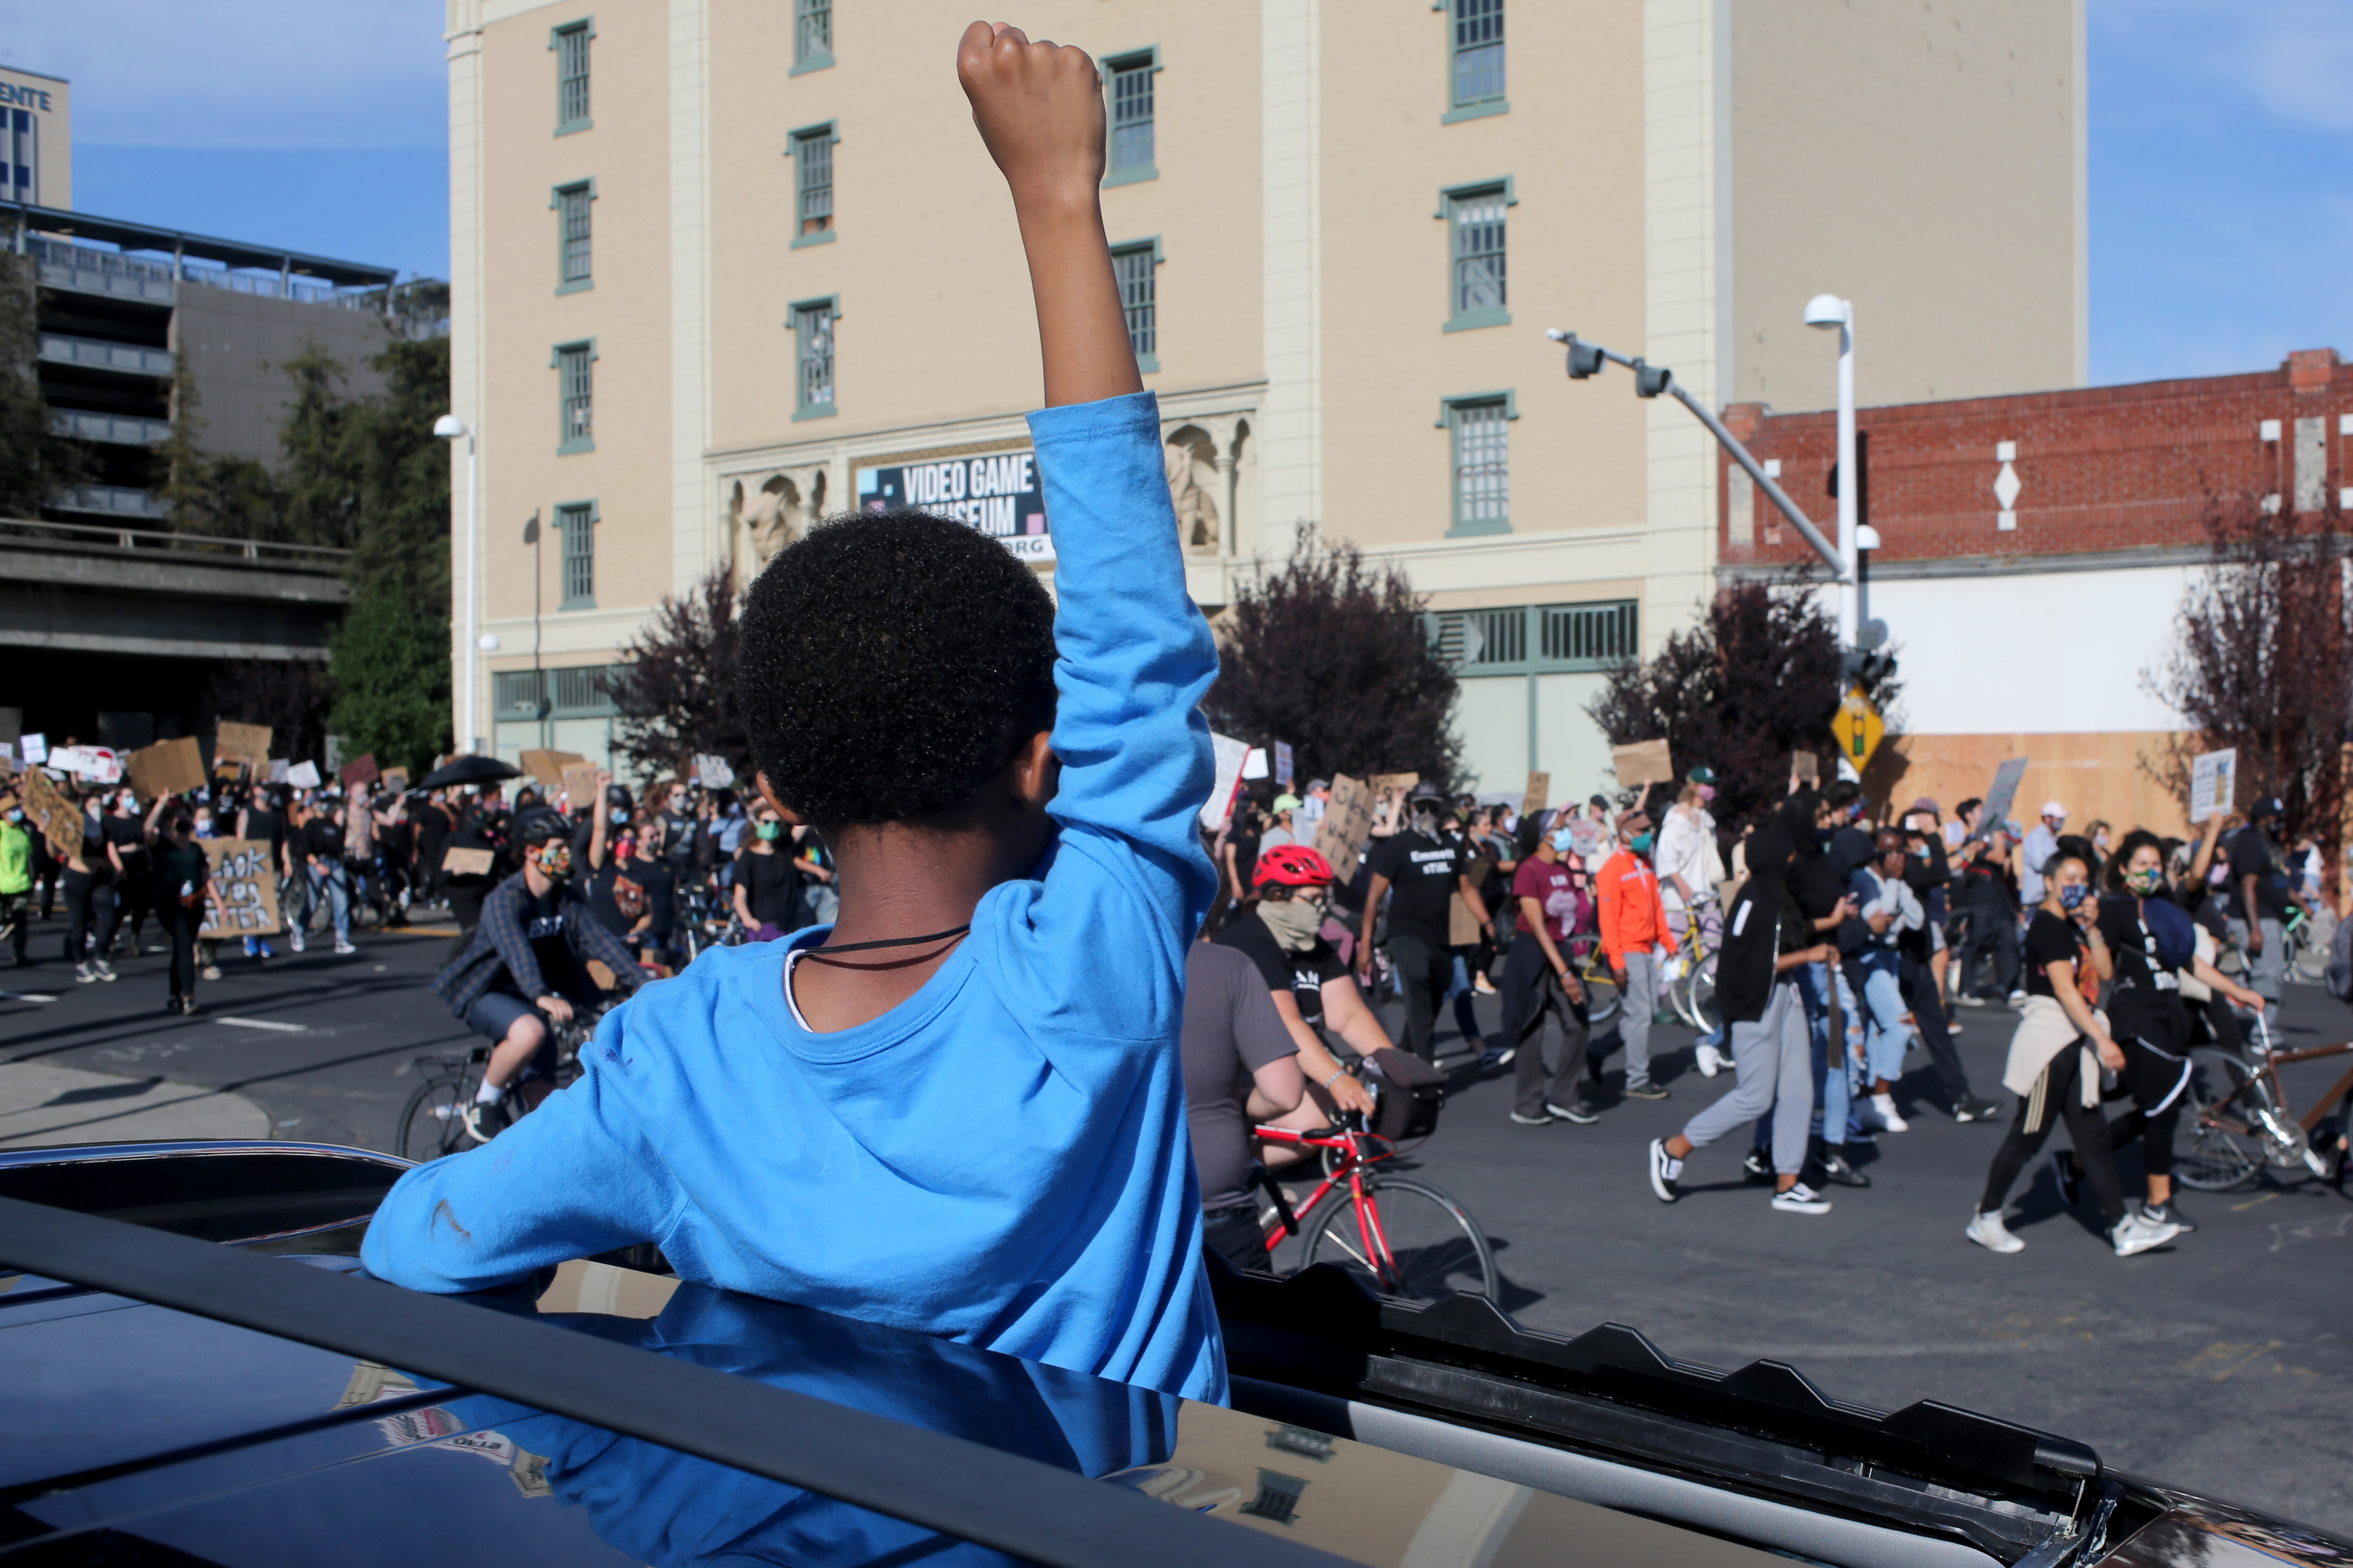 Douglas Briscoe raises his fist from the sunroof of his father's SUV as thousands of protesters march in Oakland, Calif., on June 1, 2020 over the death of George Floyd. (Ray Chavez—East Bay Times/Getty Images)